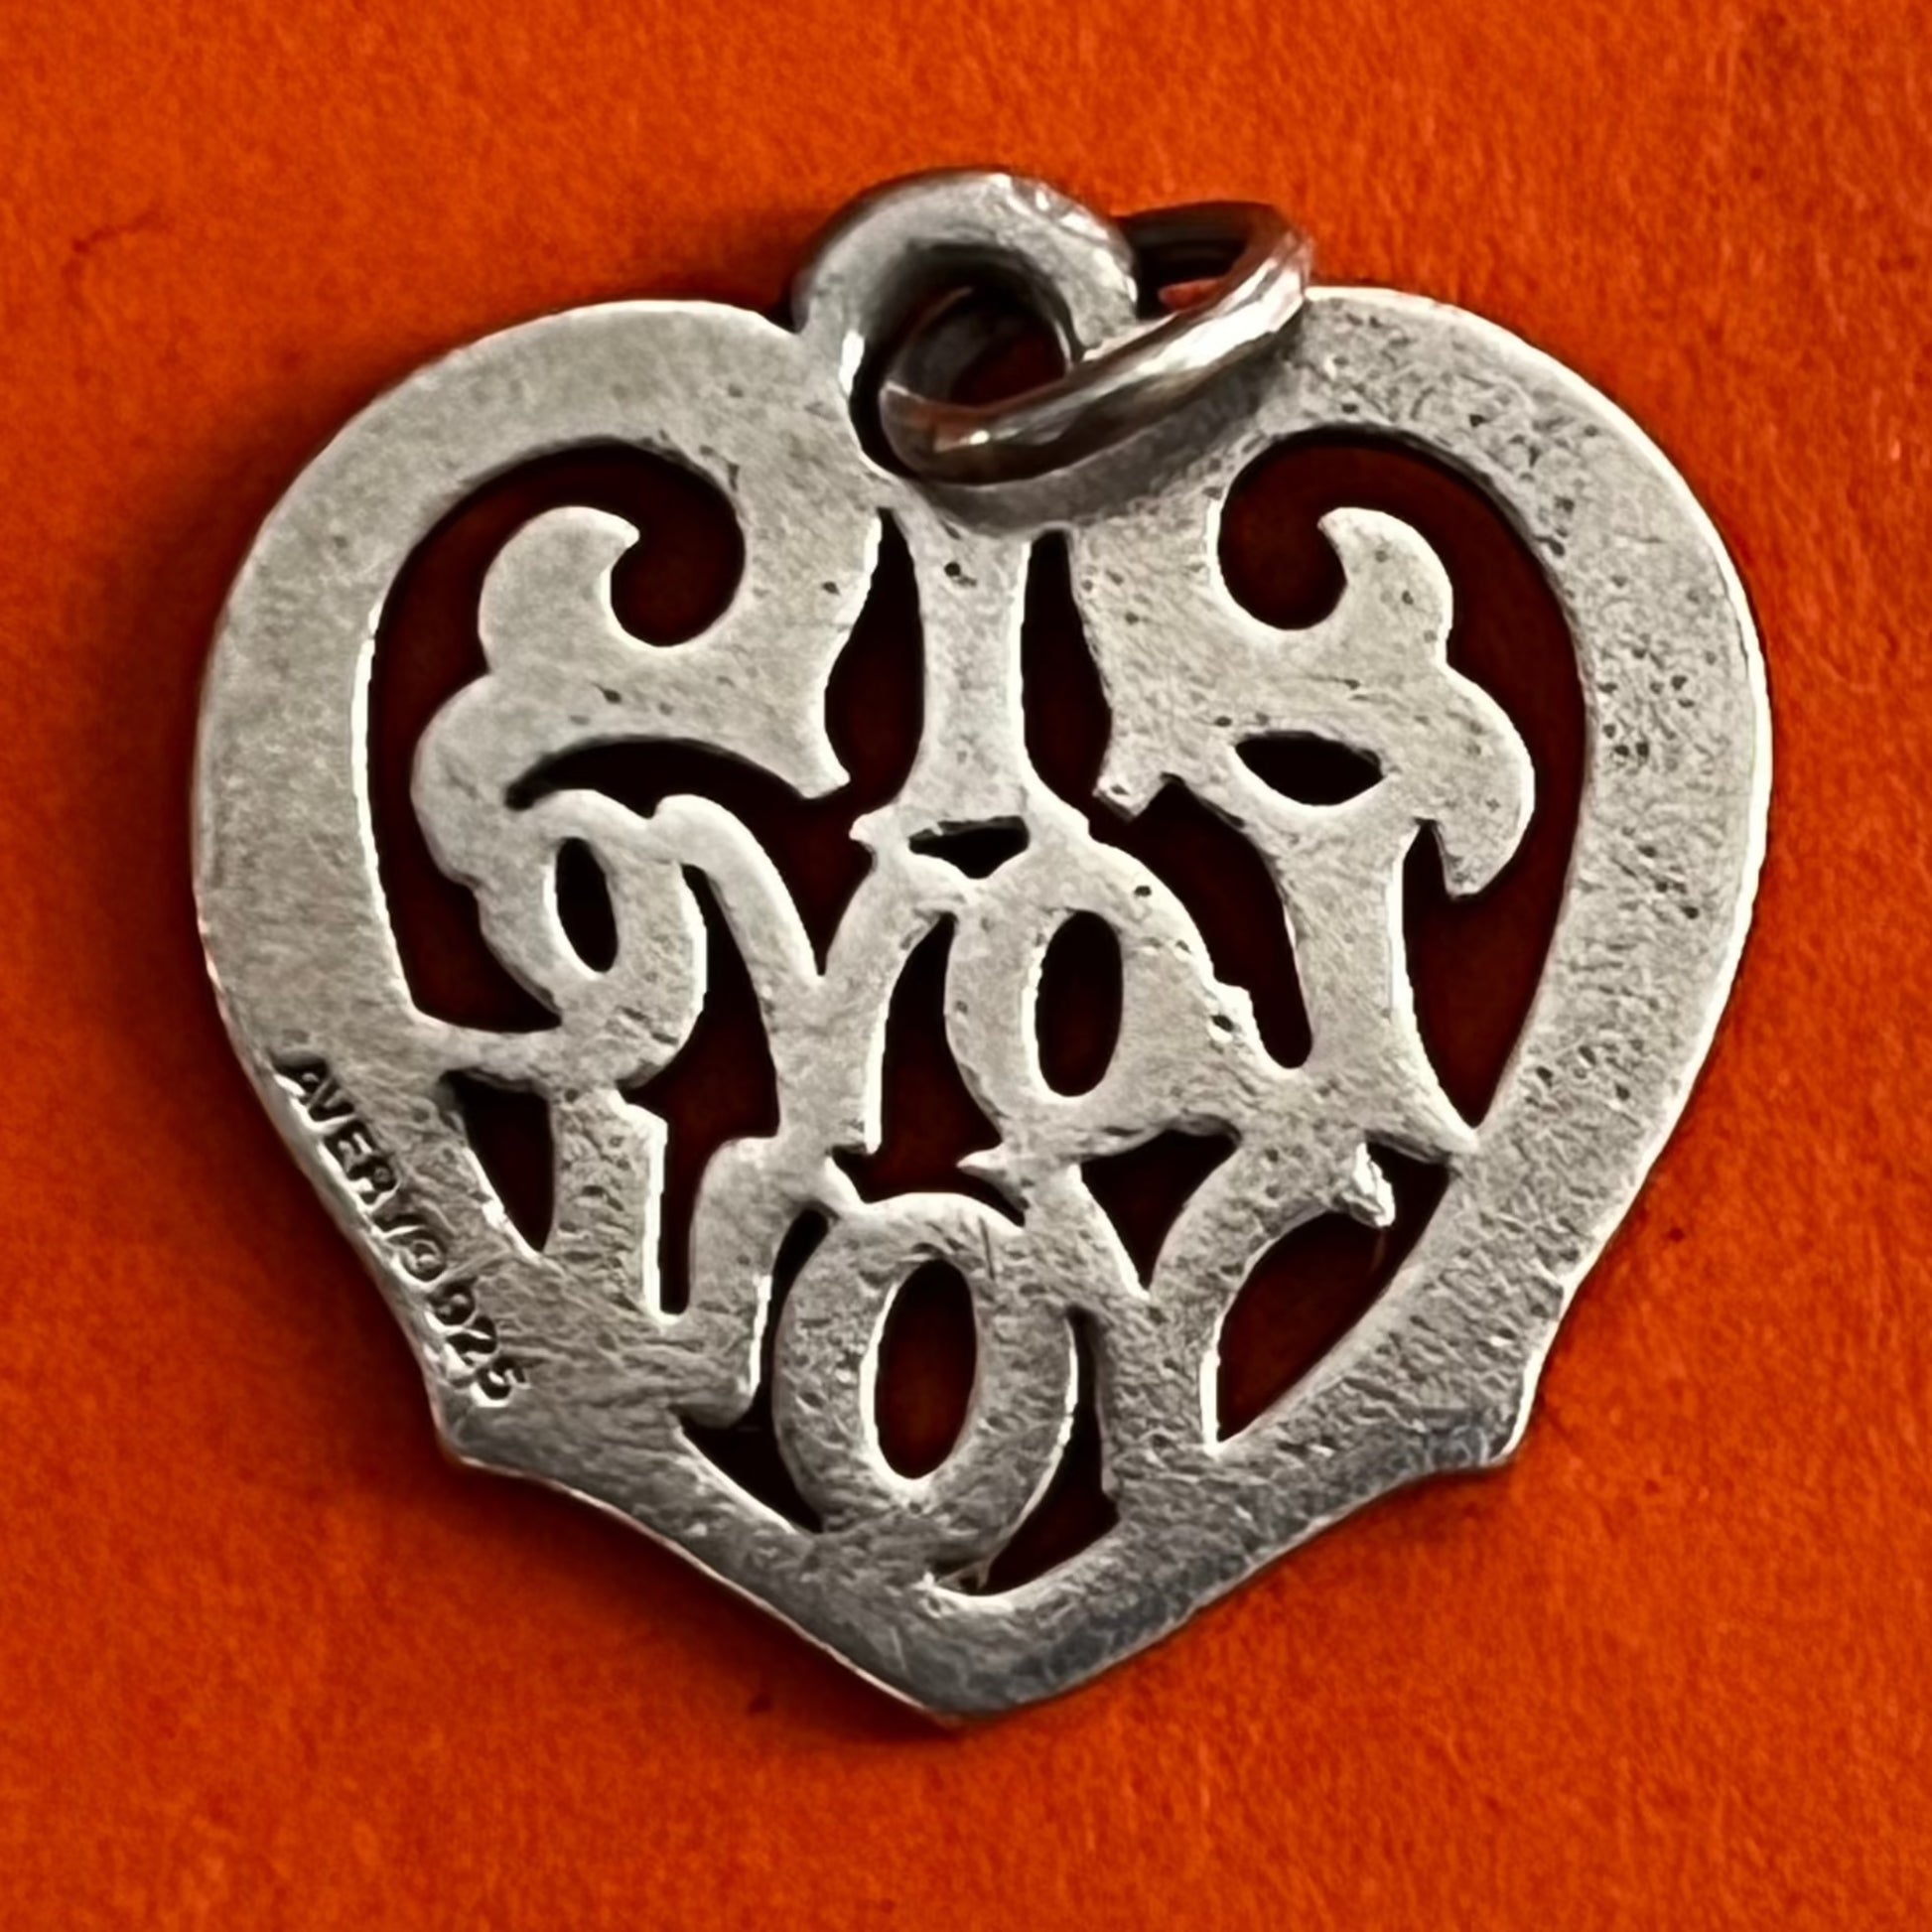 James Avery from The Heart Cross Charm - Sterling Silver